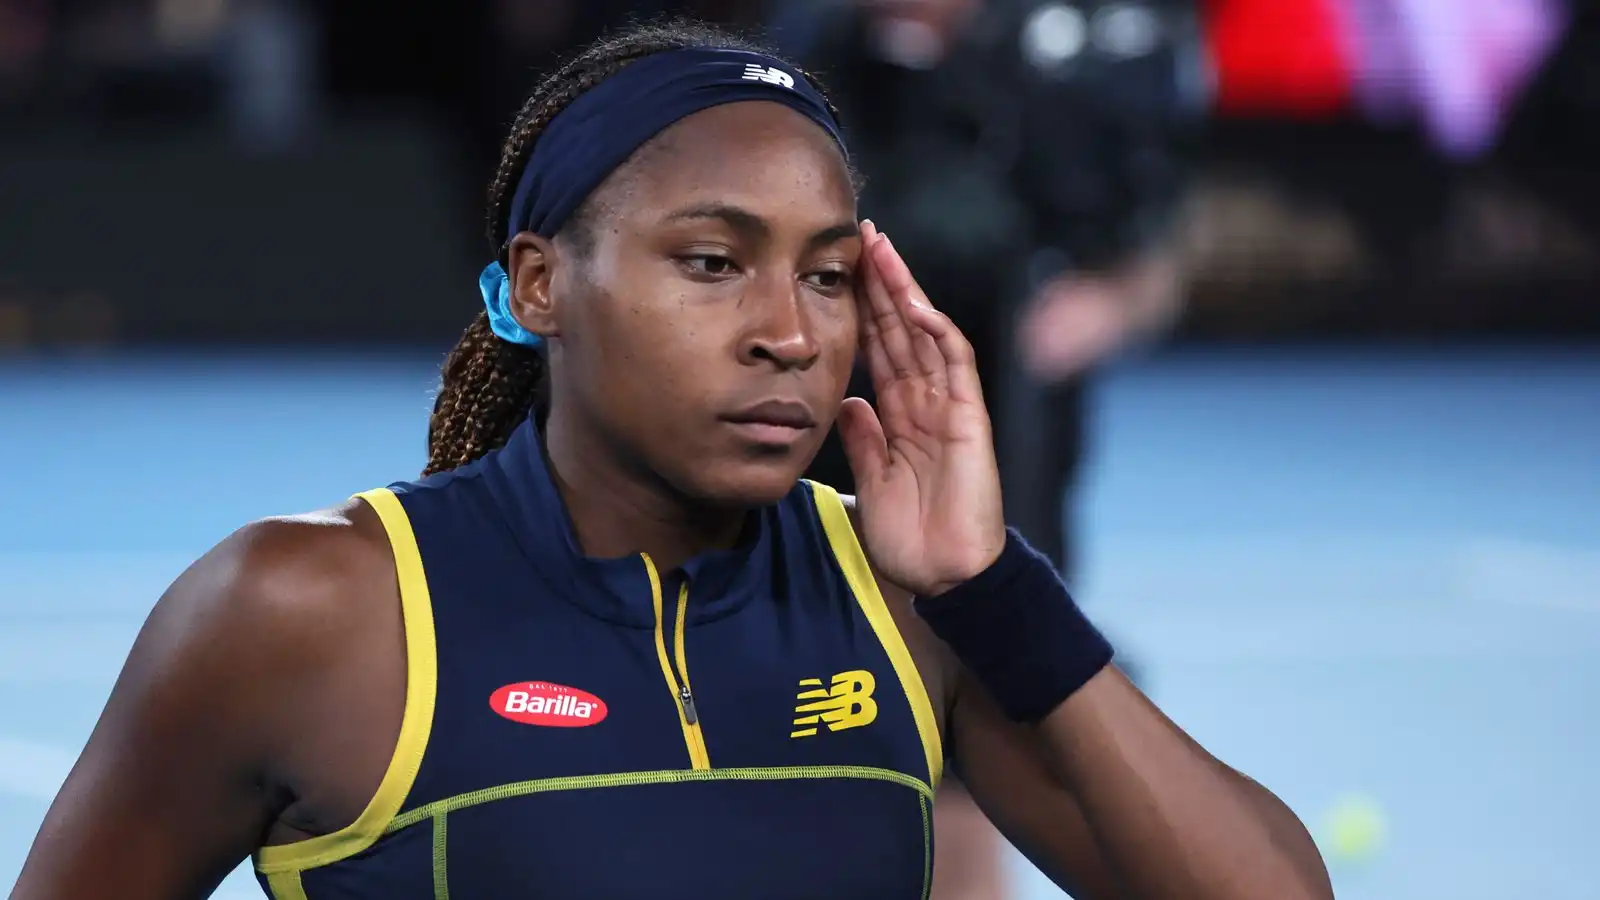 Australian Open: Coco Gauff praises Serena Williams and Maria Sharapova for not letting one match define their careers